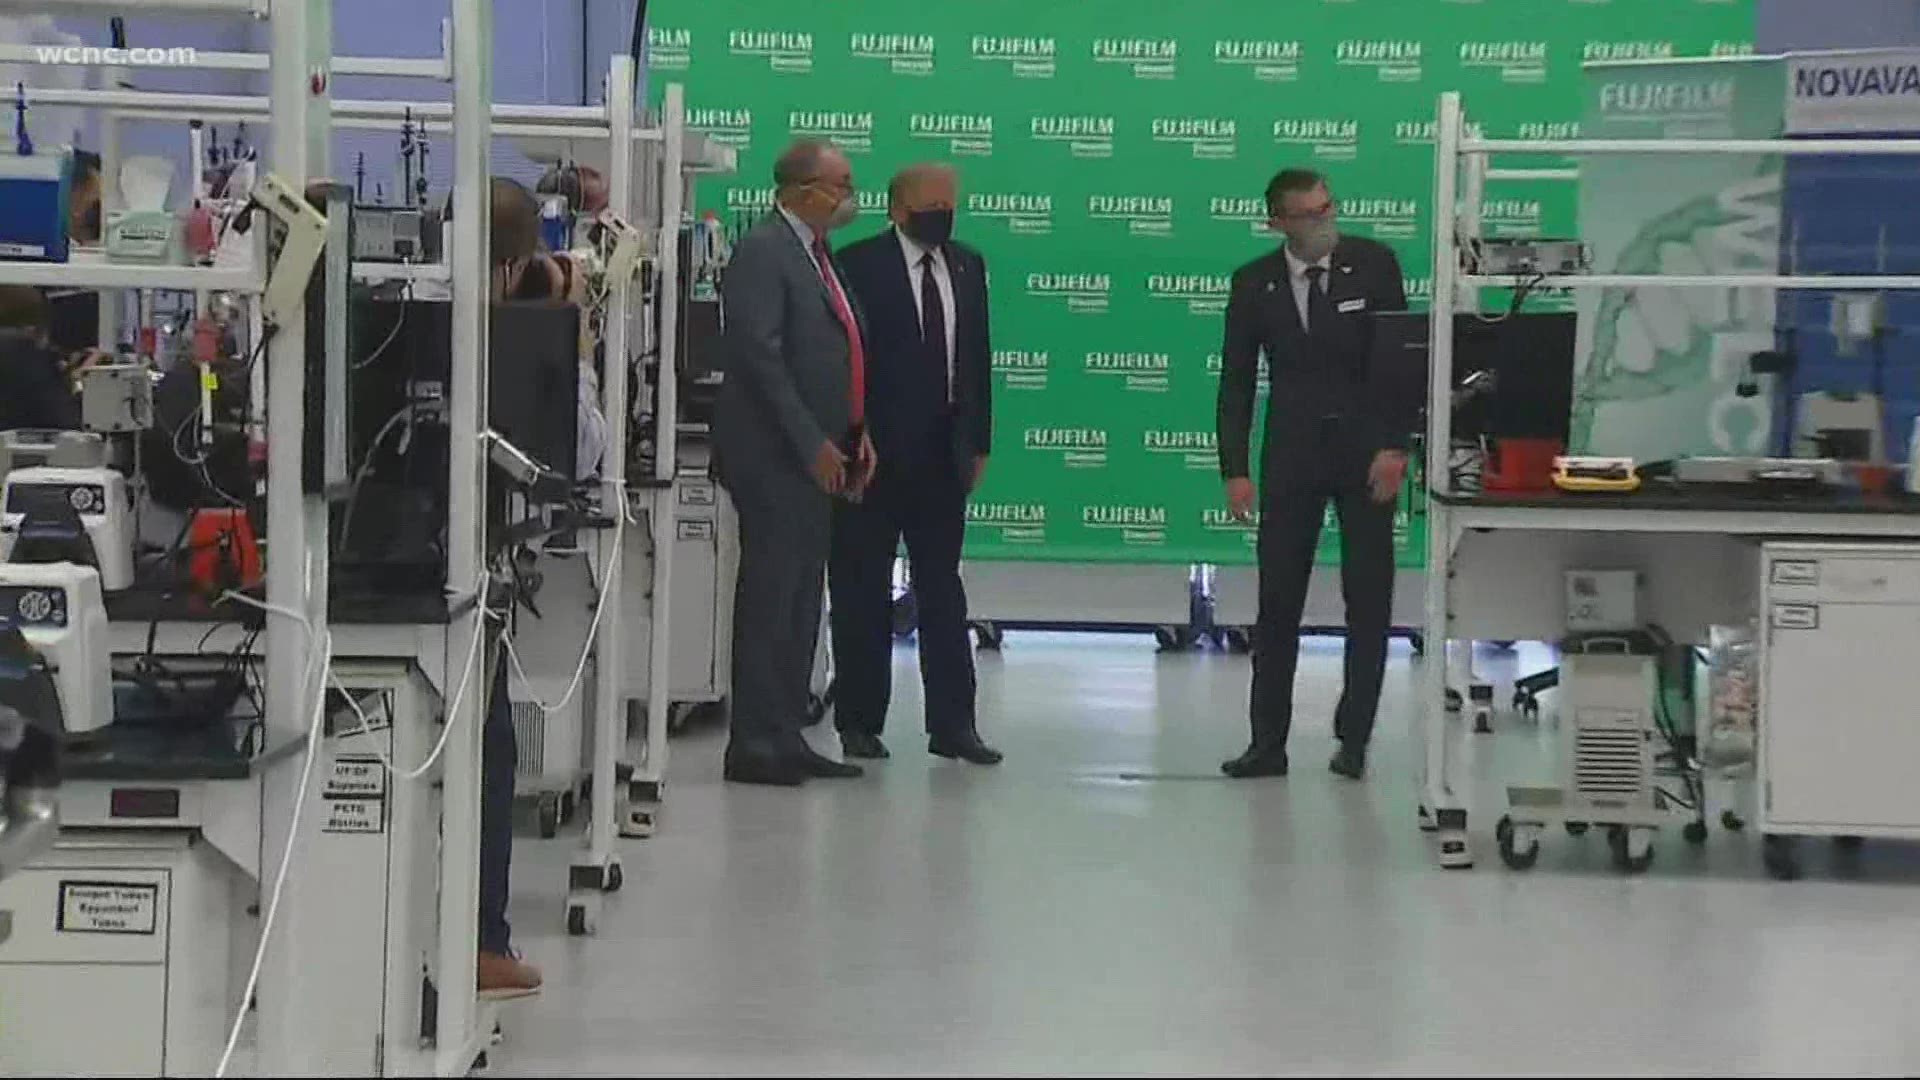 President Donald Trump is in North Carolina to tour a facility that is participating in work on a COVID-19 vaccine.